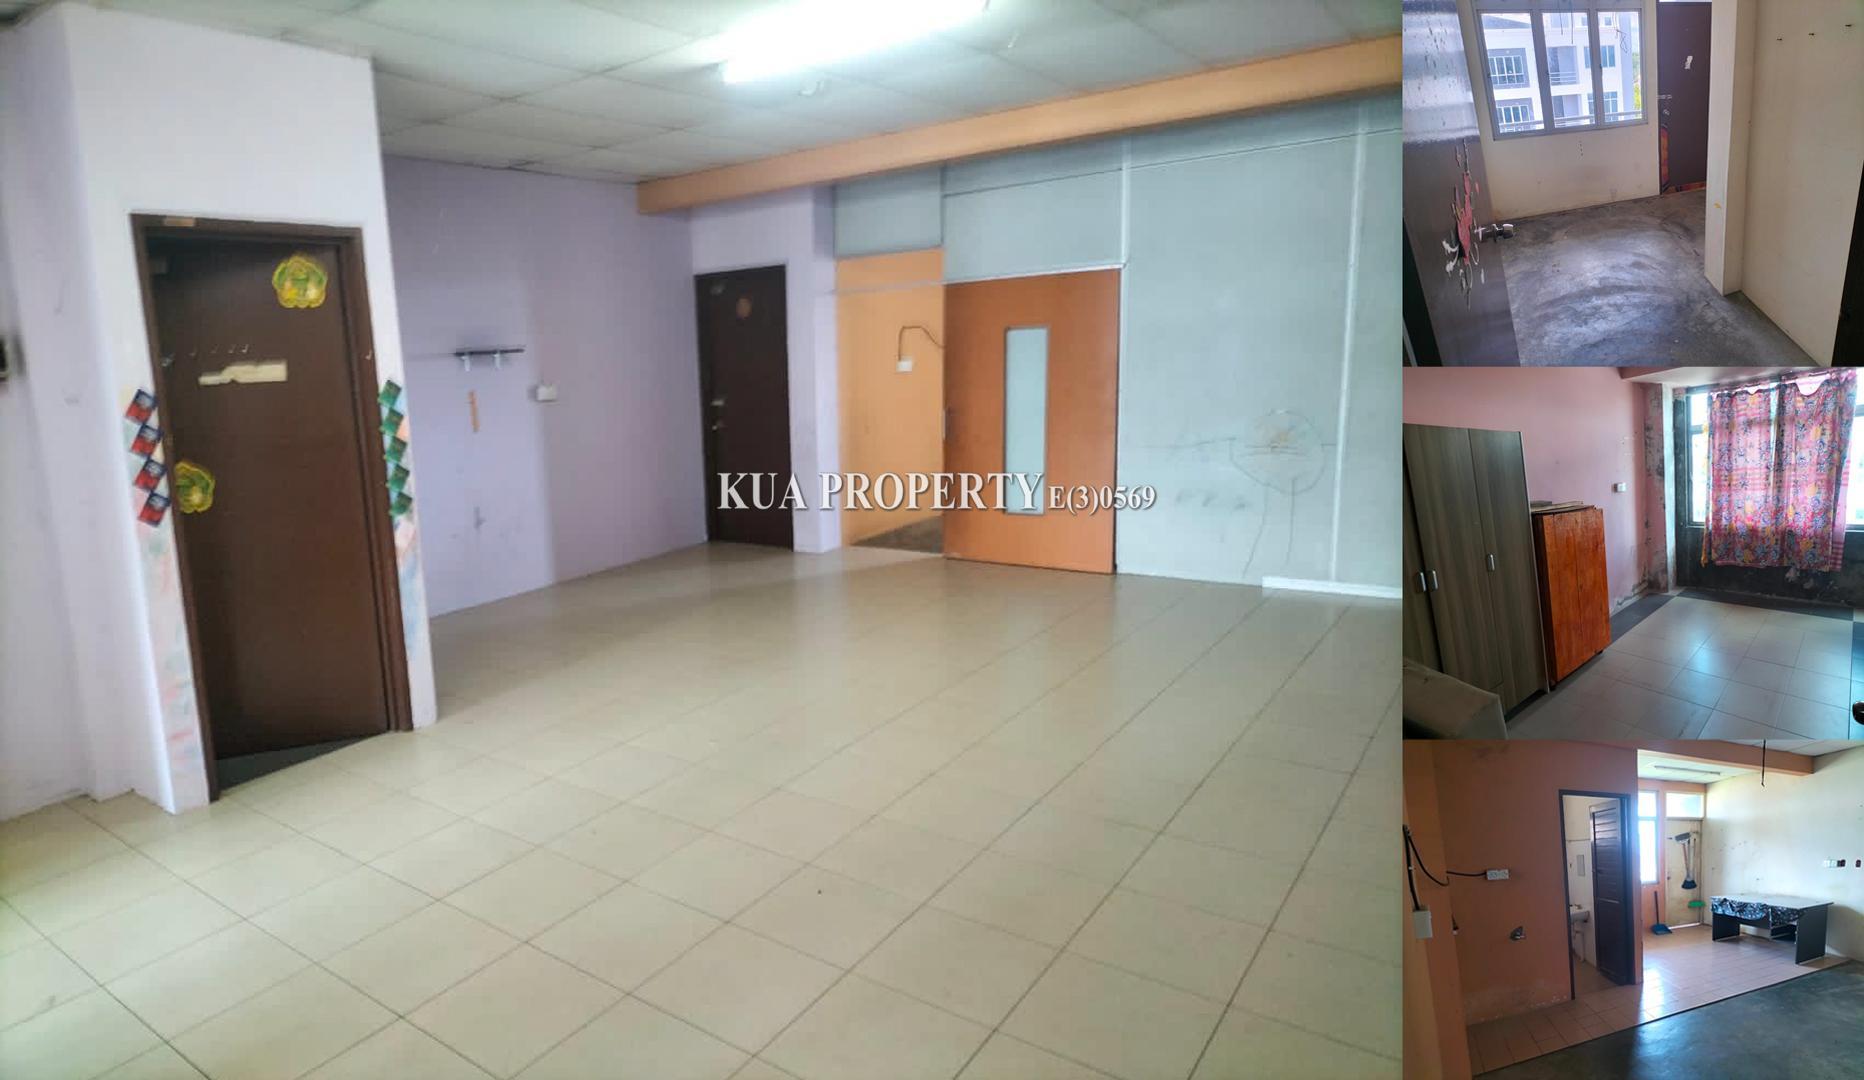 Second Floor Shophouse For Rent! Located at Tabuan Park, Kuching